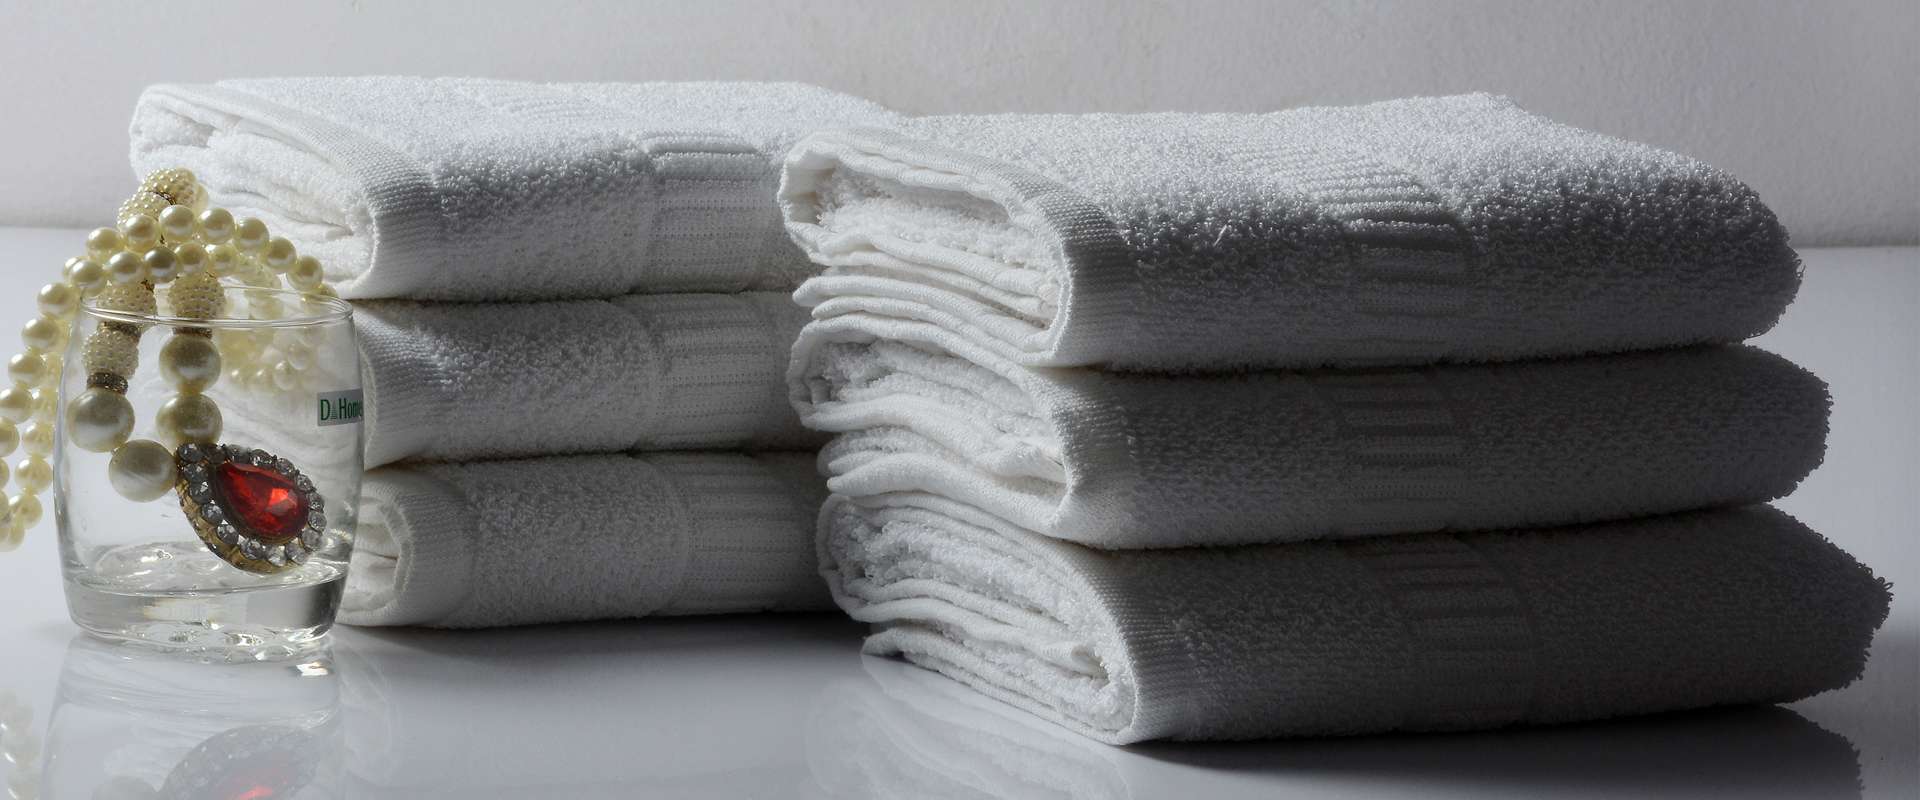 LILY WHITE TOWELS